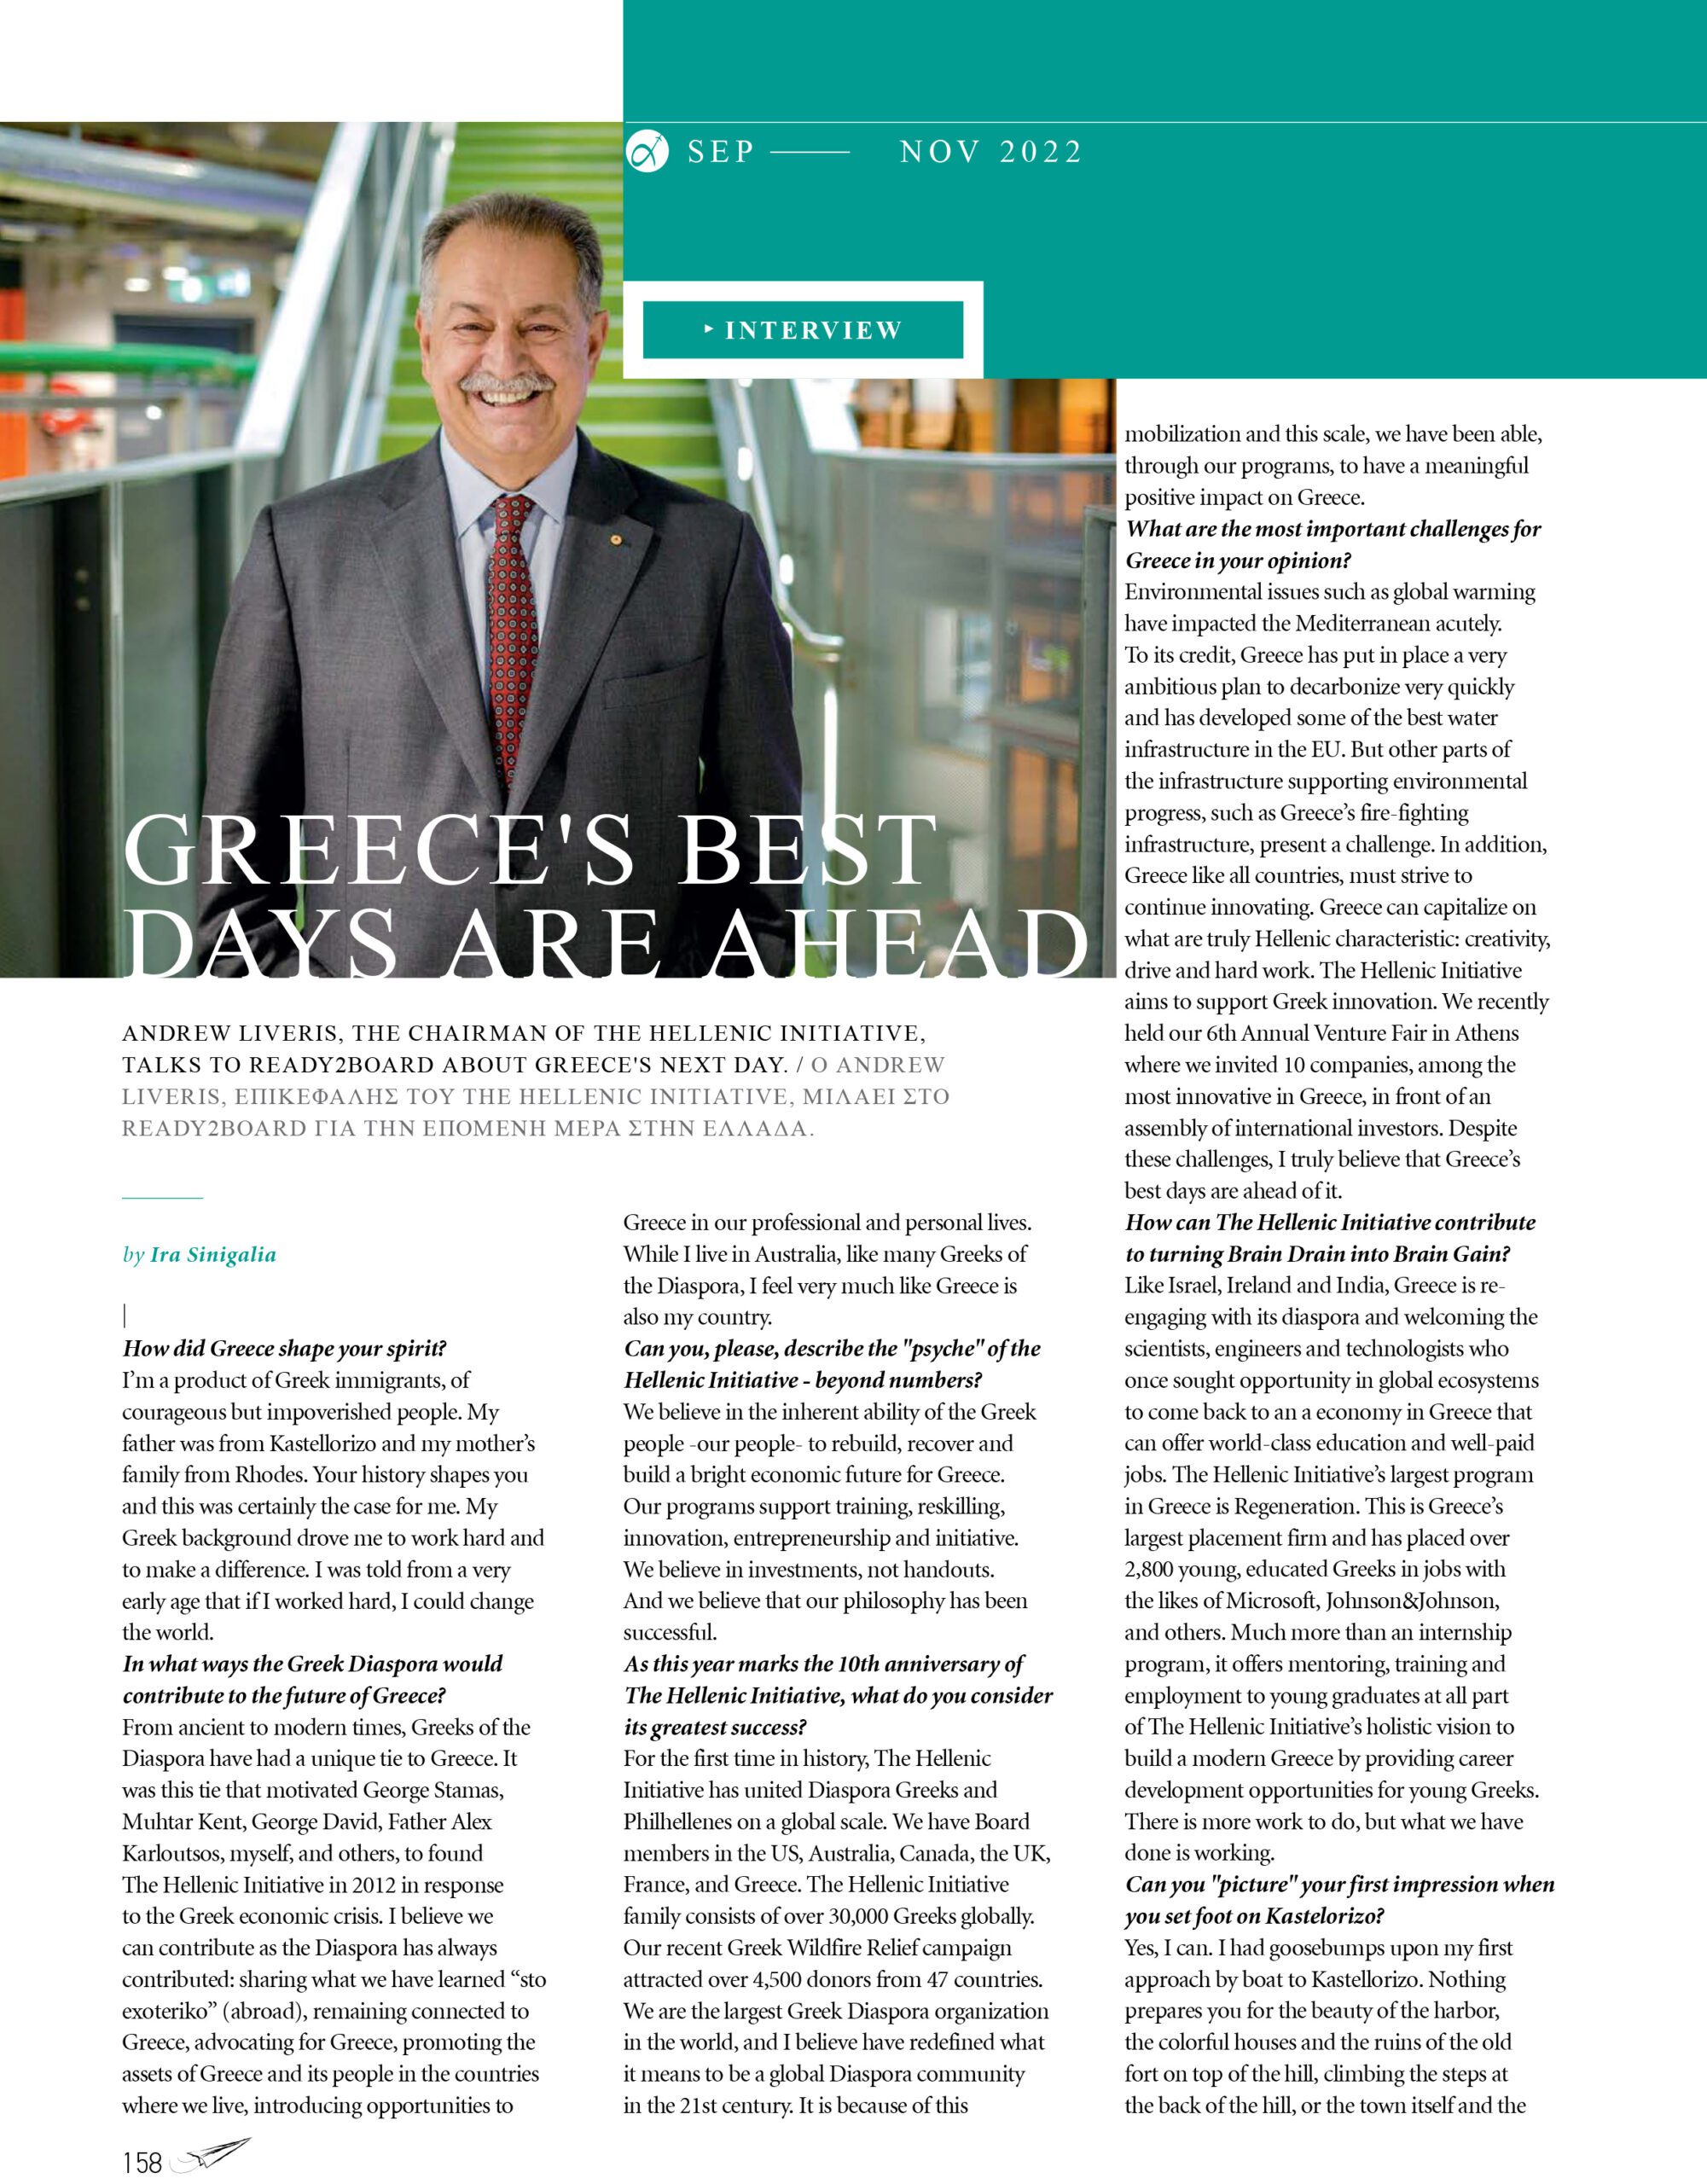 Andrew Liveris, Chairman of The Hellenic Initiative, talks to Ready2Board magazine about THI's role in Greece’s new day